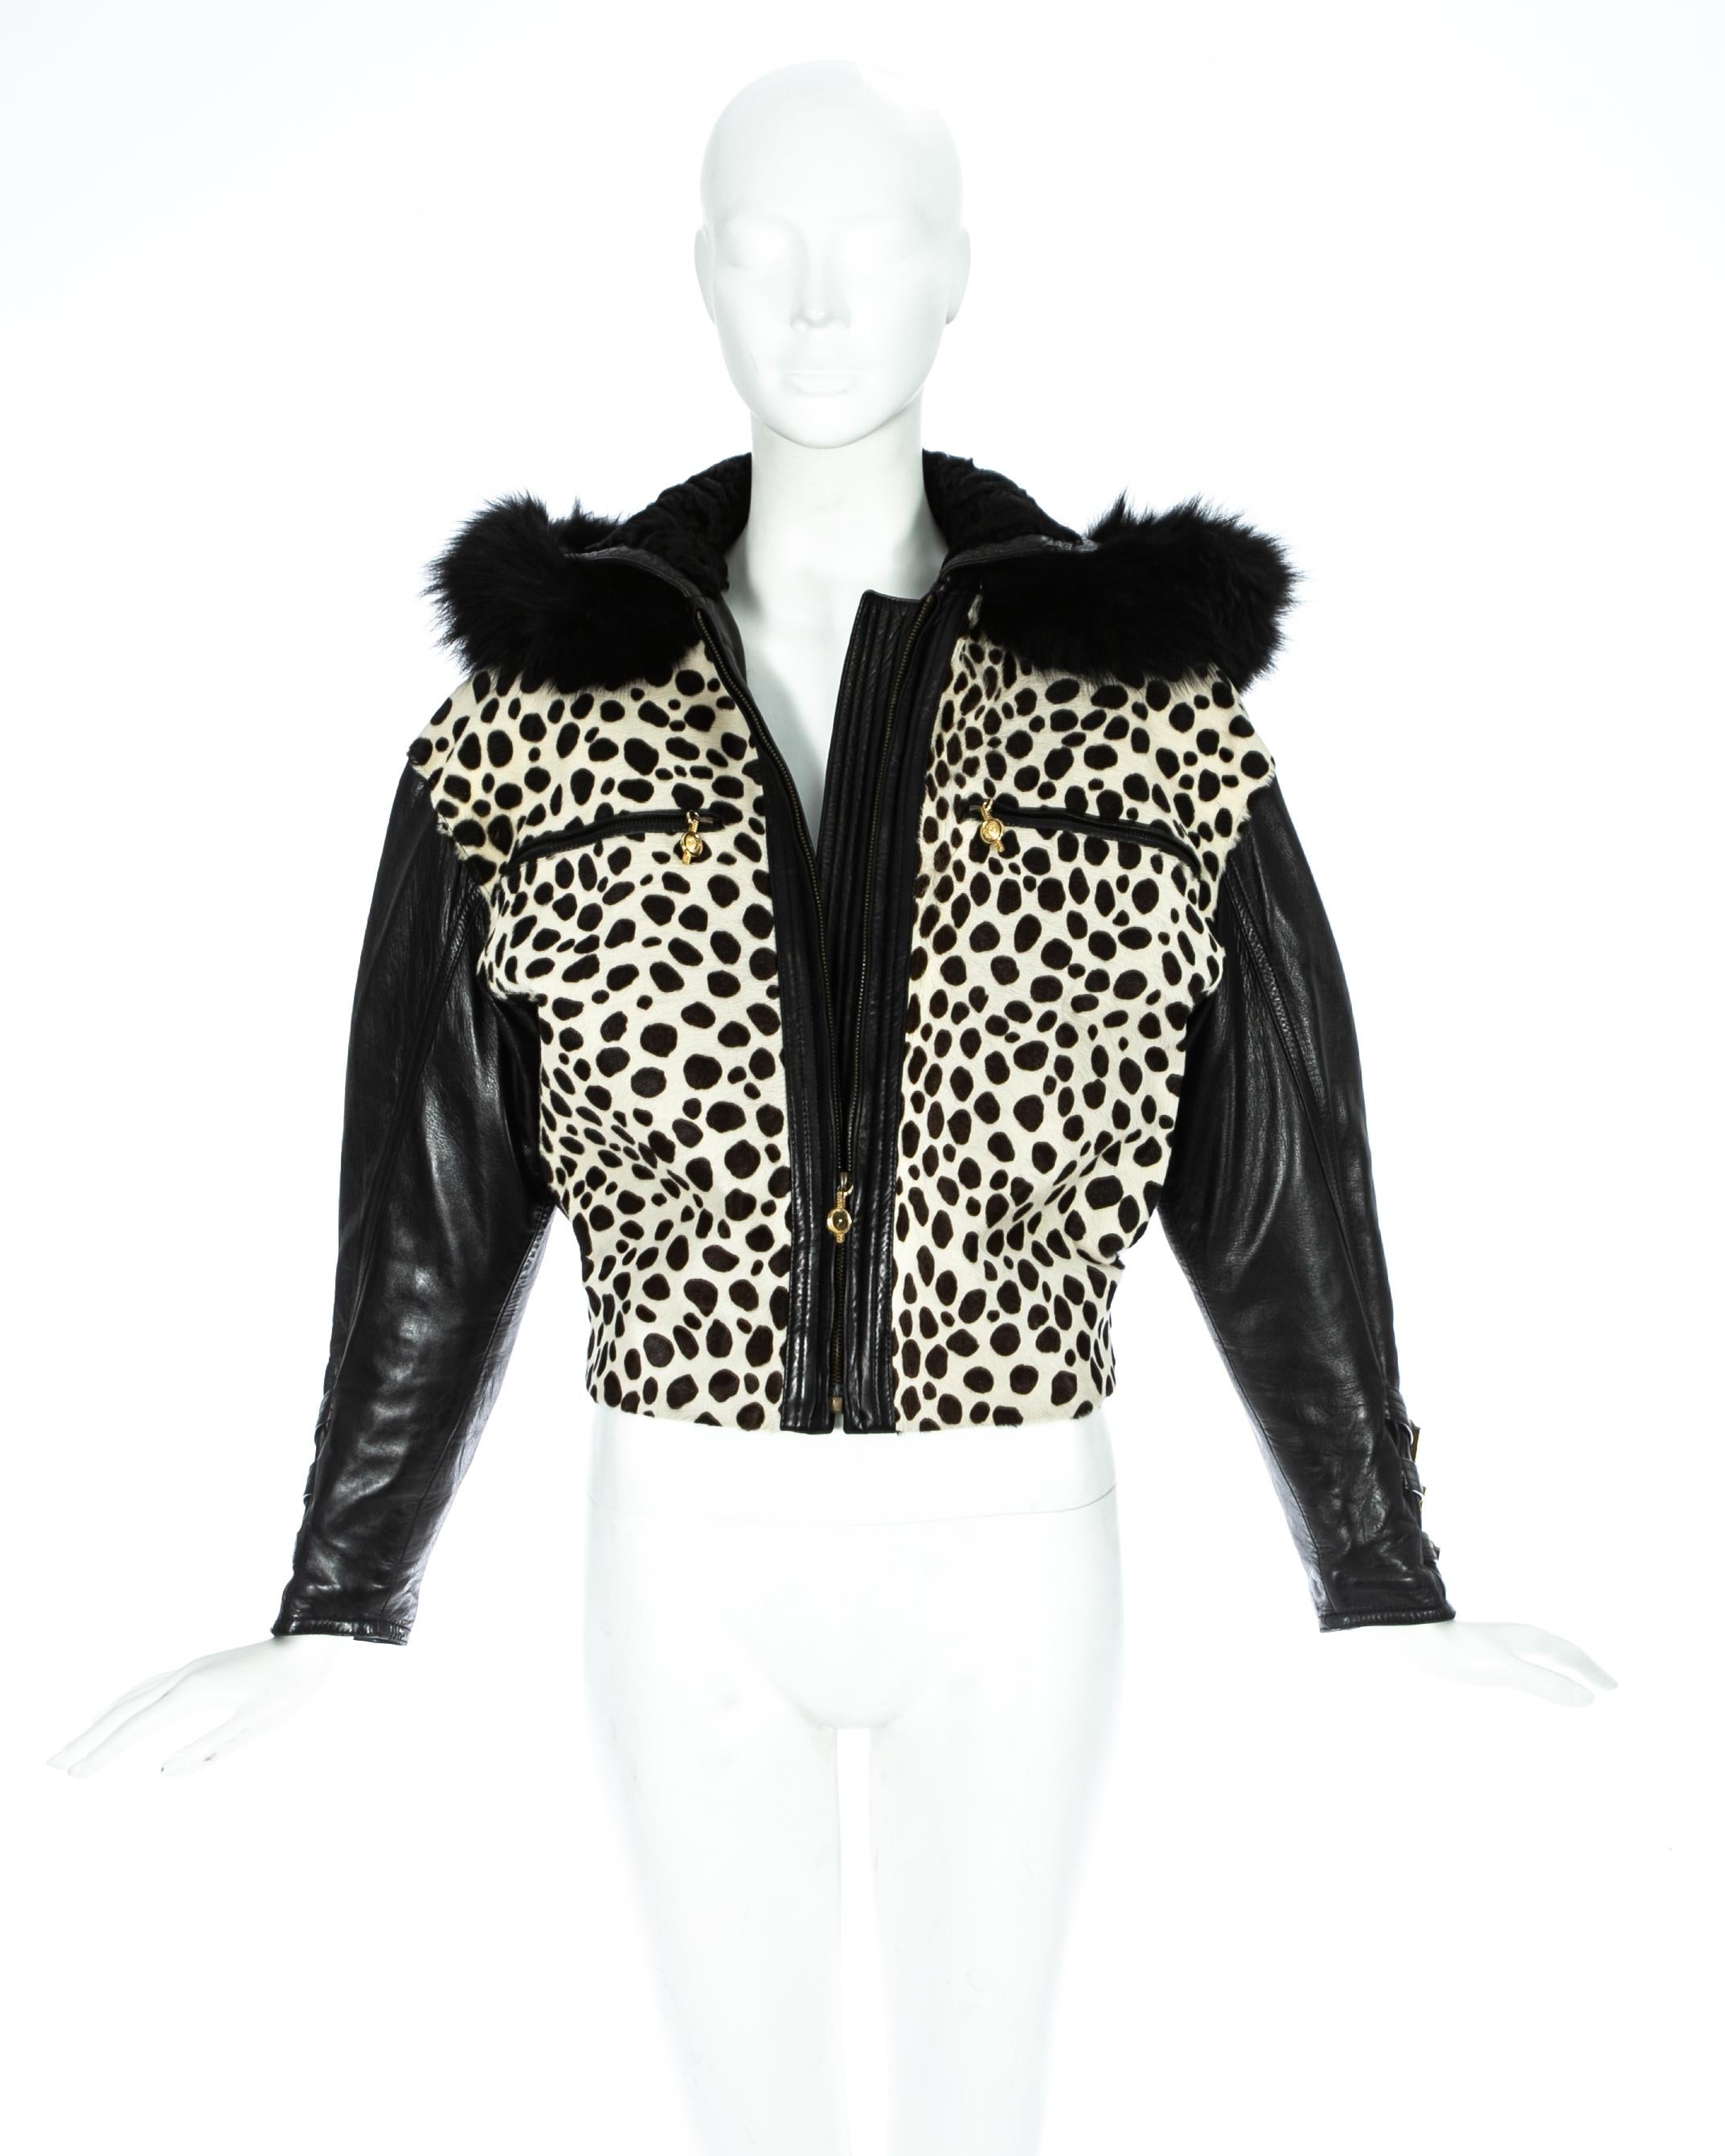 Gianni Versace

- Animal print pony hair at front/
- Black fox fur hood with Astrakhan fur 
- Gold and silver metal buckles on cuff and waist 
- Quilted lining 

Autumn-Winter 1992